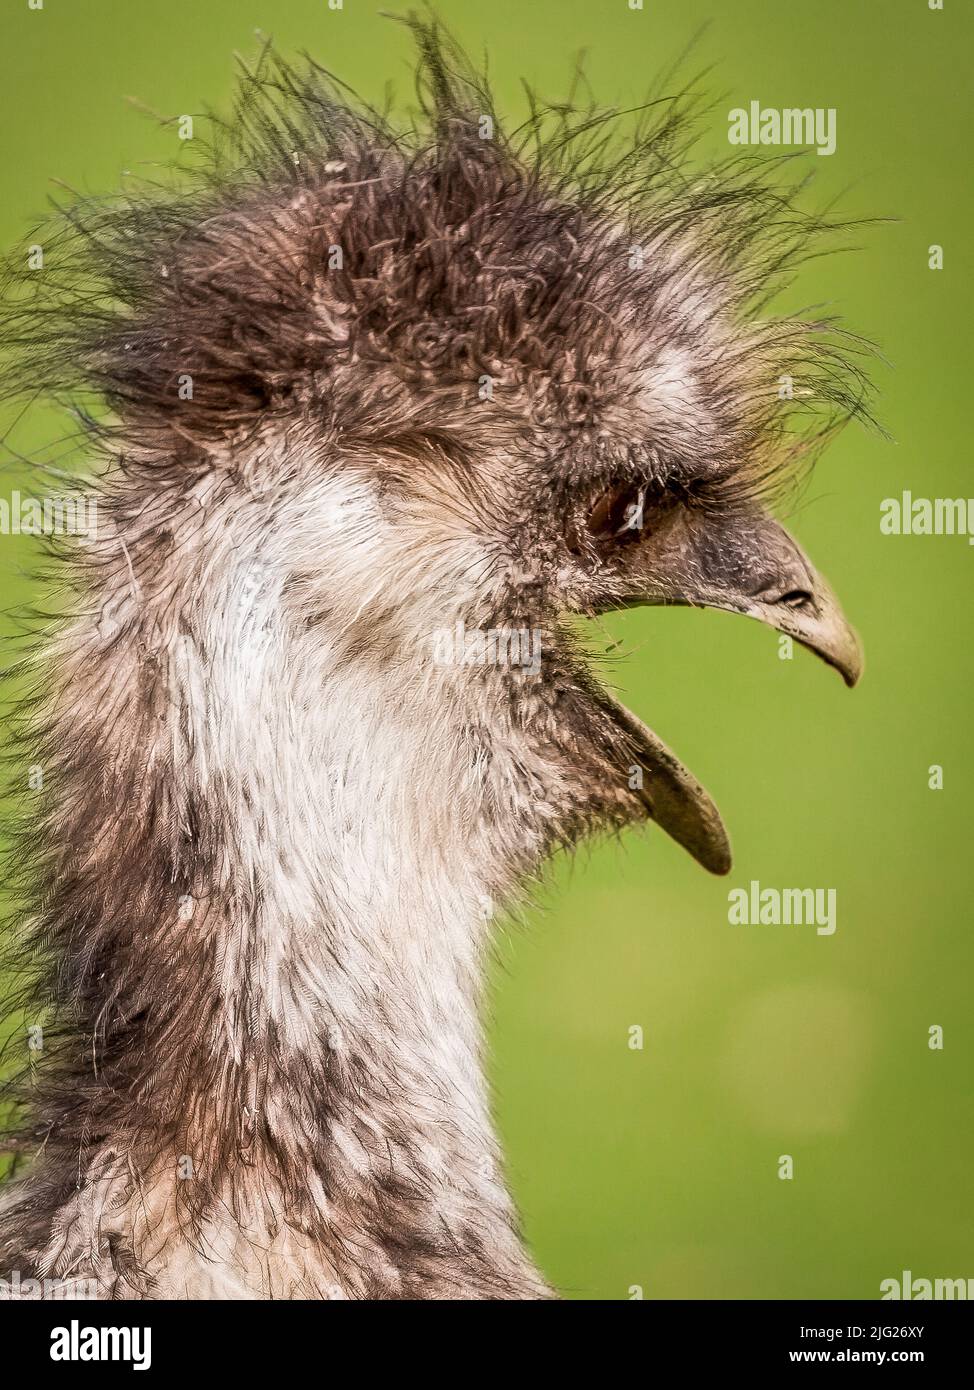 Bad hair day for an Emu Stock Photo